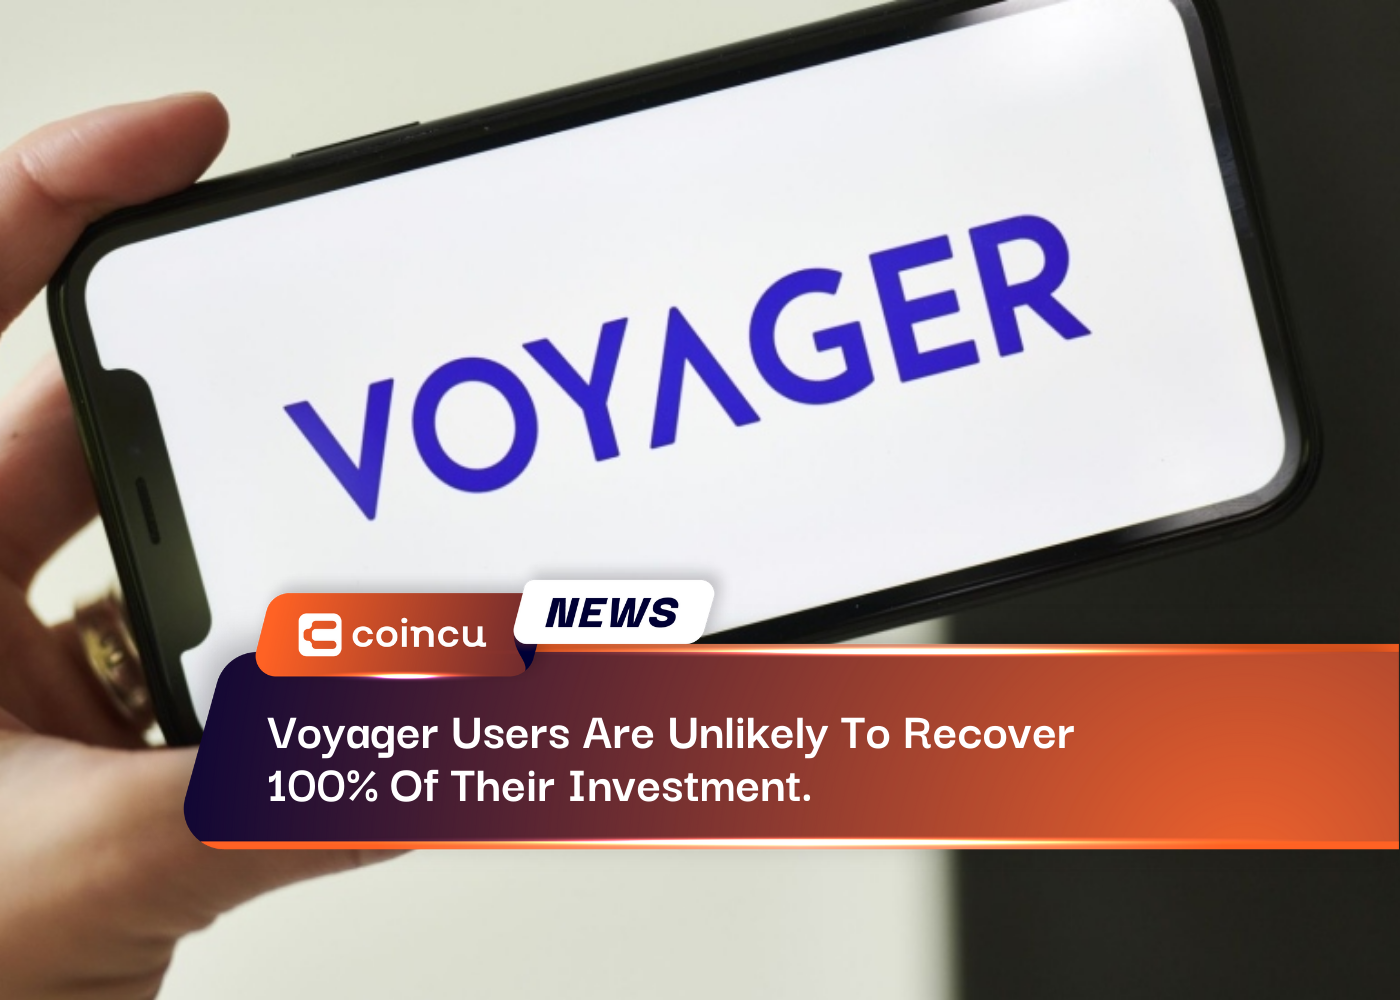 Voyager Users Are Unlikely To Recover 100% Of Their Investment.